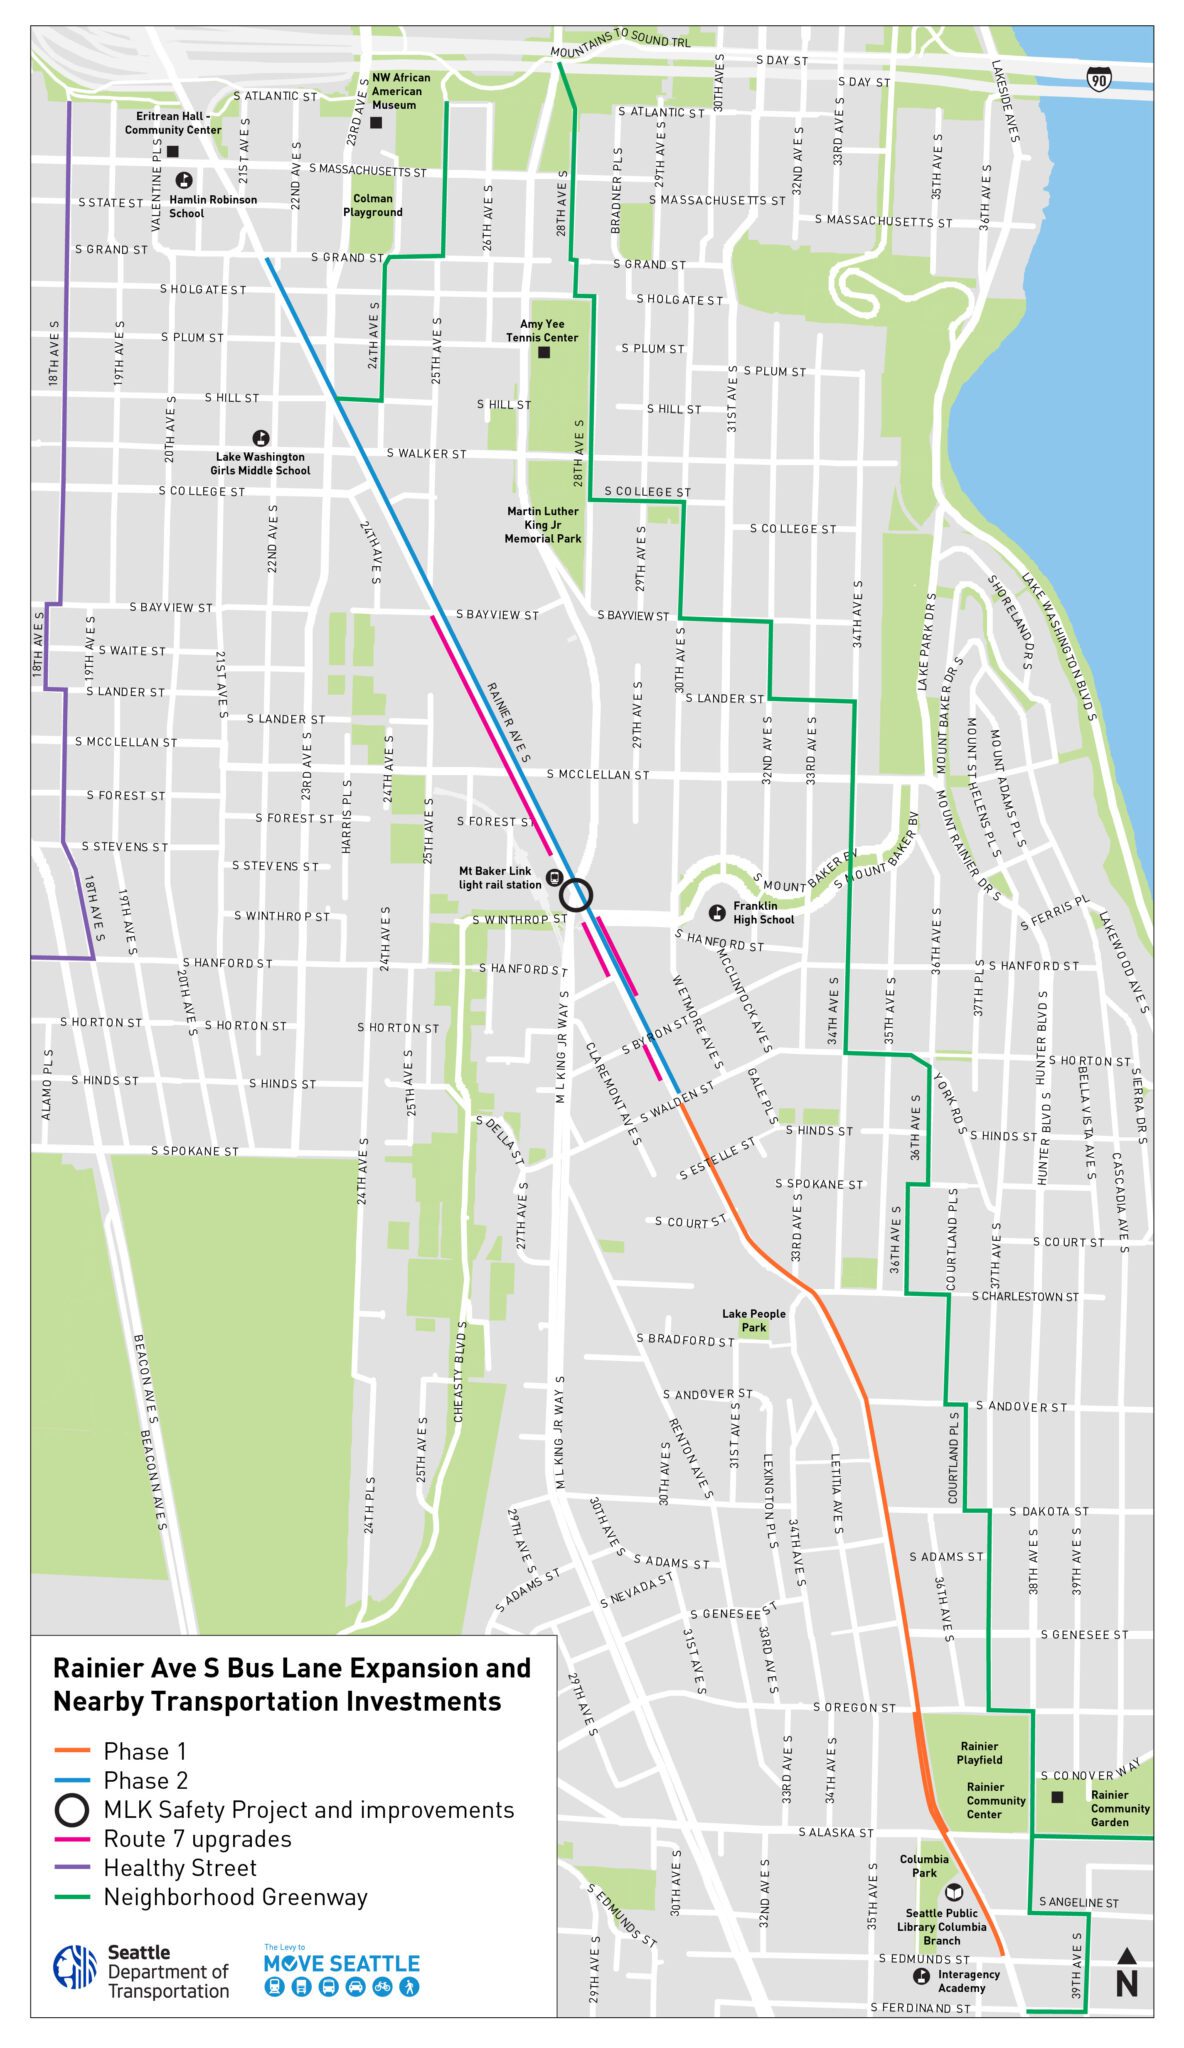 Map of key aspects of Rainier Ave S and surrounding communities in southeast Seattle. Lines show where current and future bus only lanes are along Rainier Ave S. Neighborhood Greenway routes are shown in green lines traveling north to I-90.